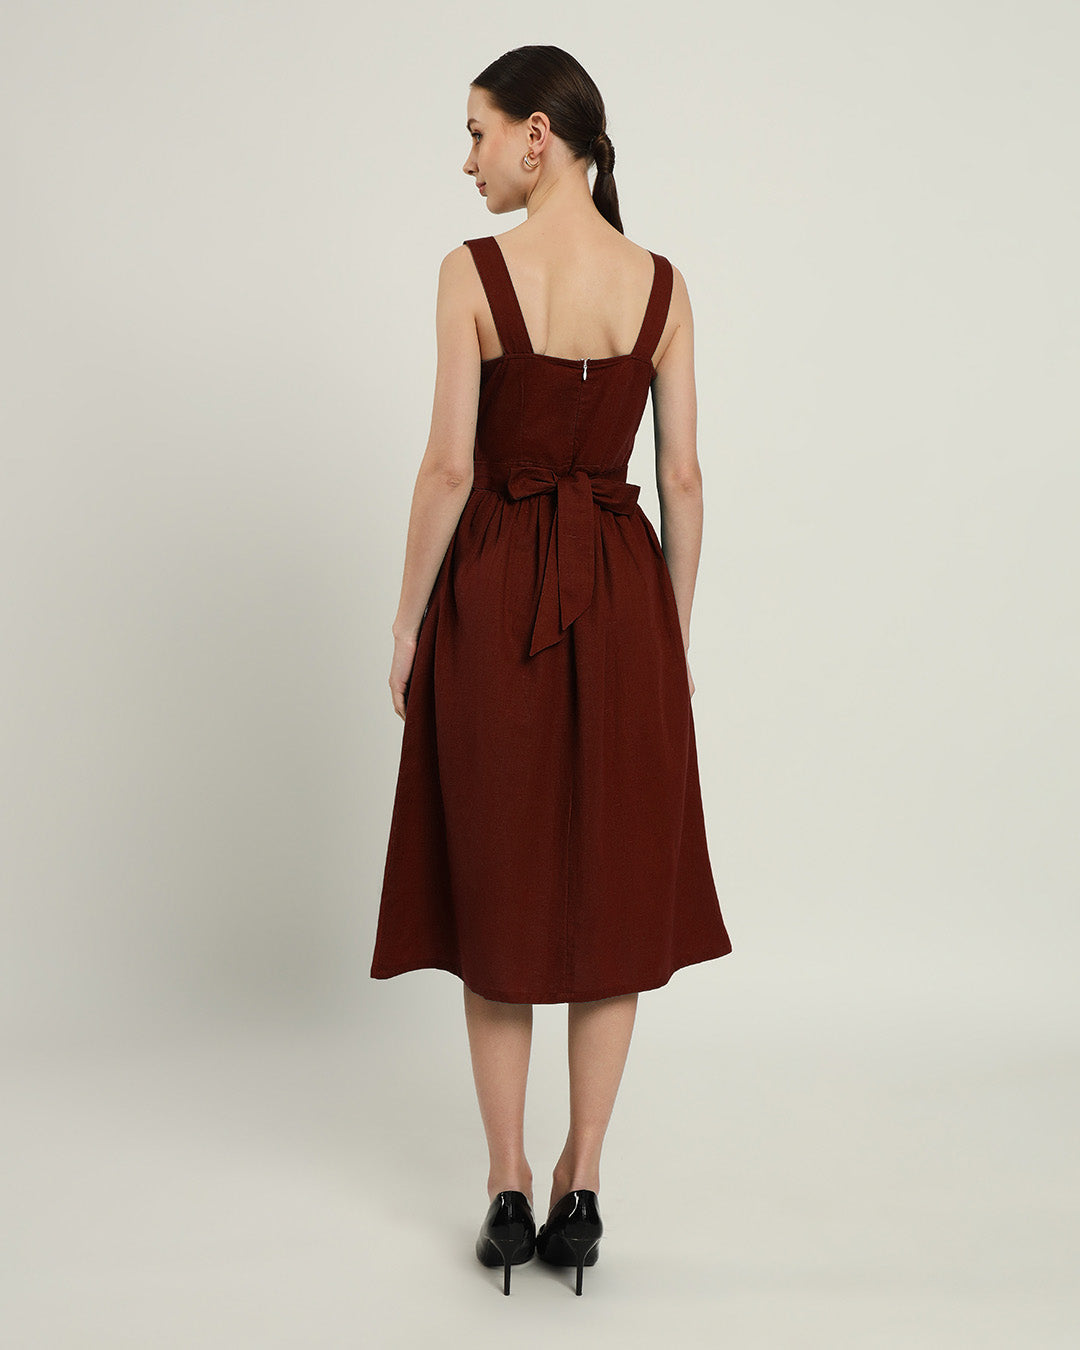 The Mihara Rouge Dress